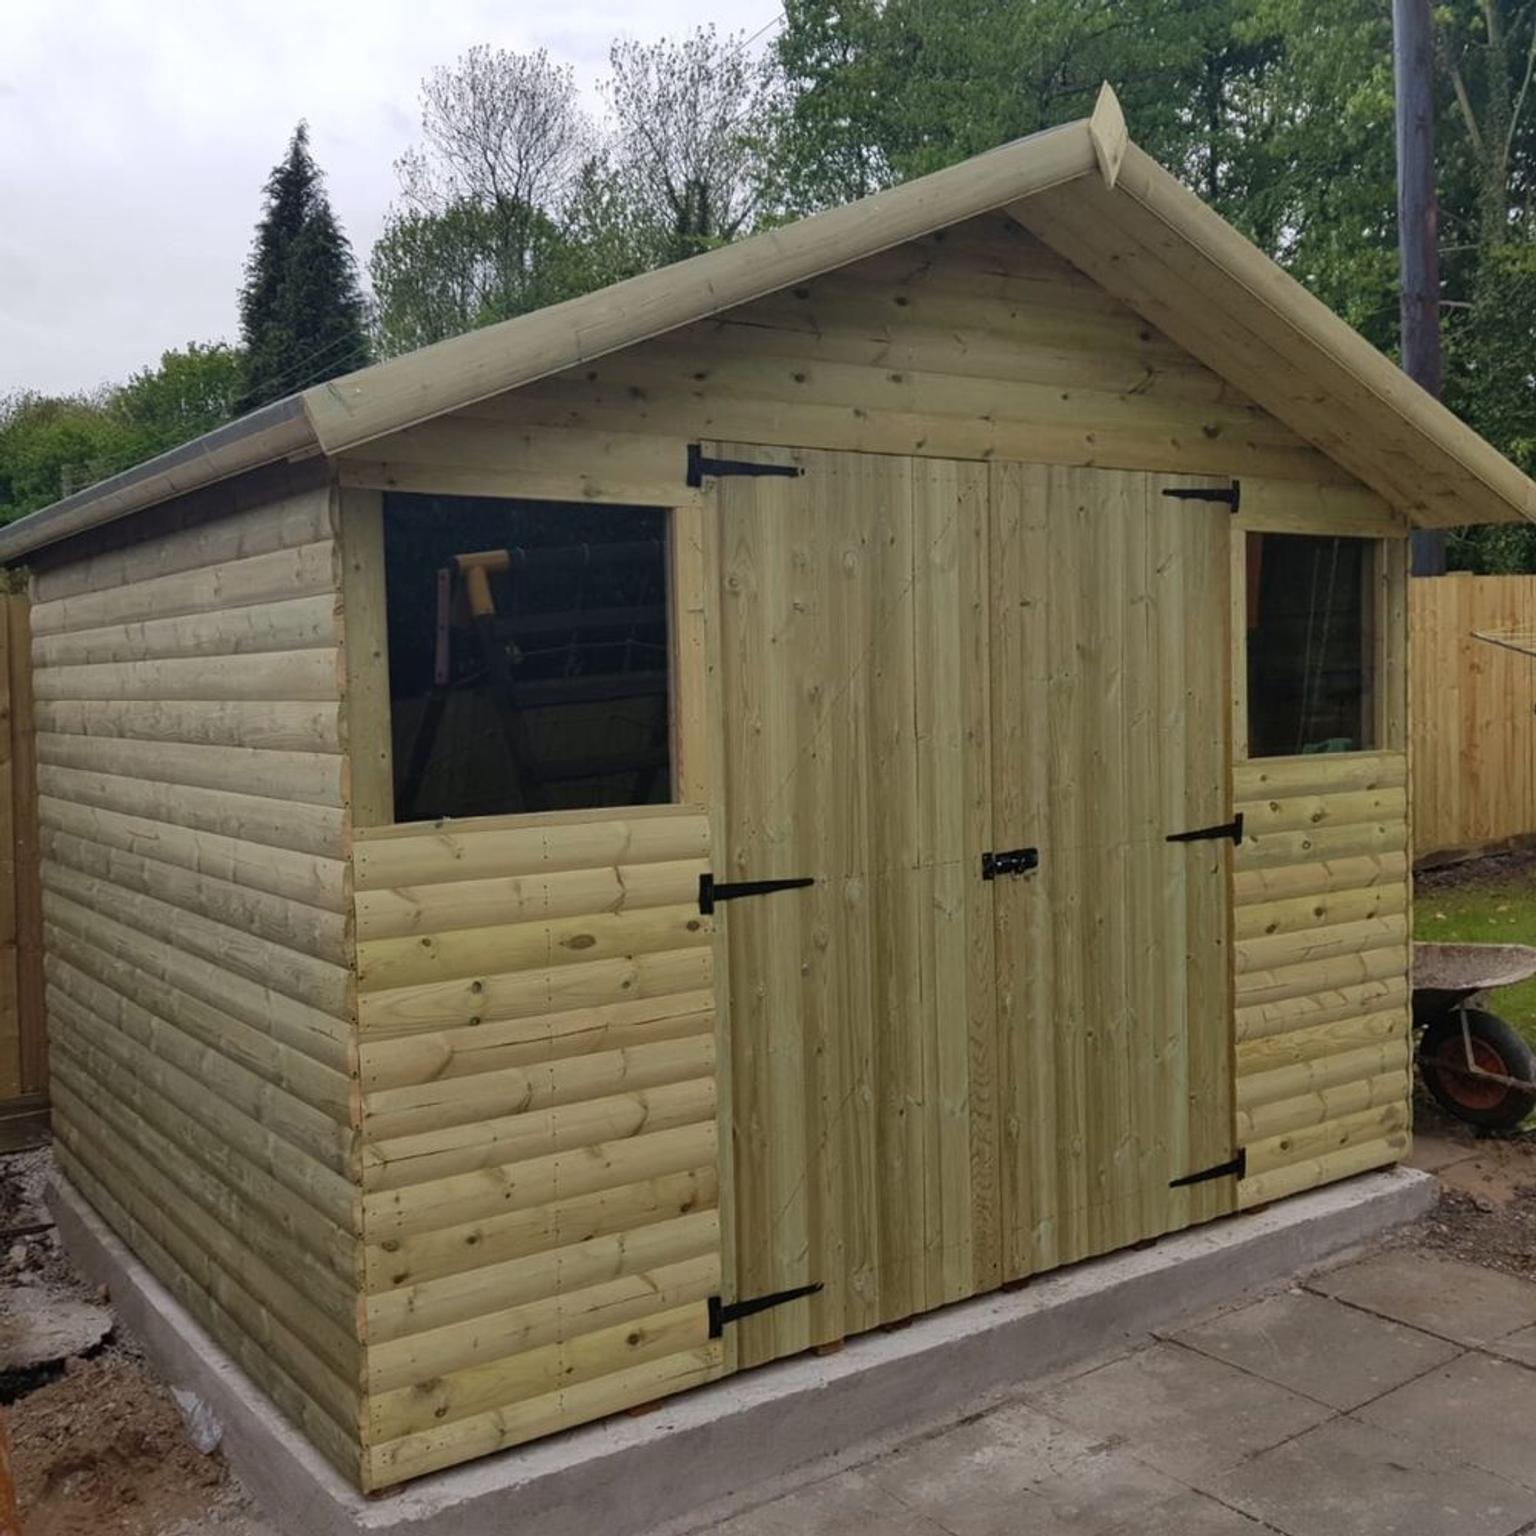 garden shed in dy6 8xd west midlands for £900.00 for sale